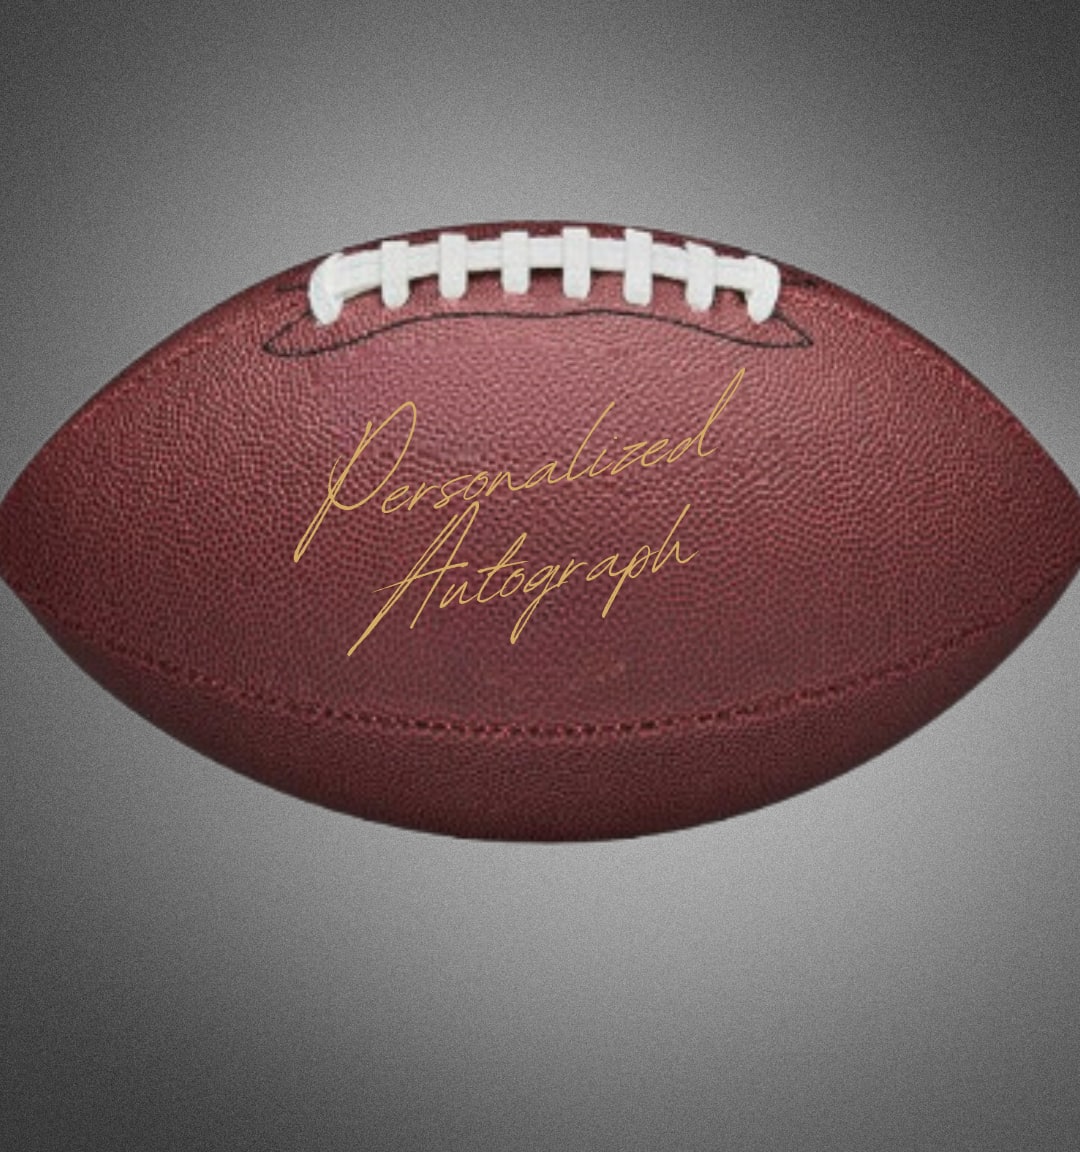 Limited Edition Miguel Mitchell Autographed Football